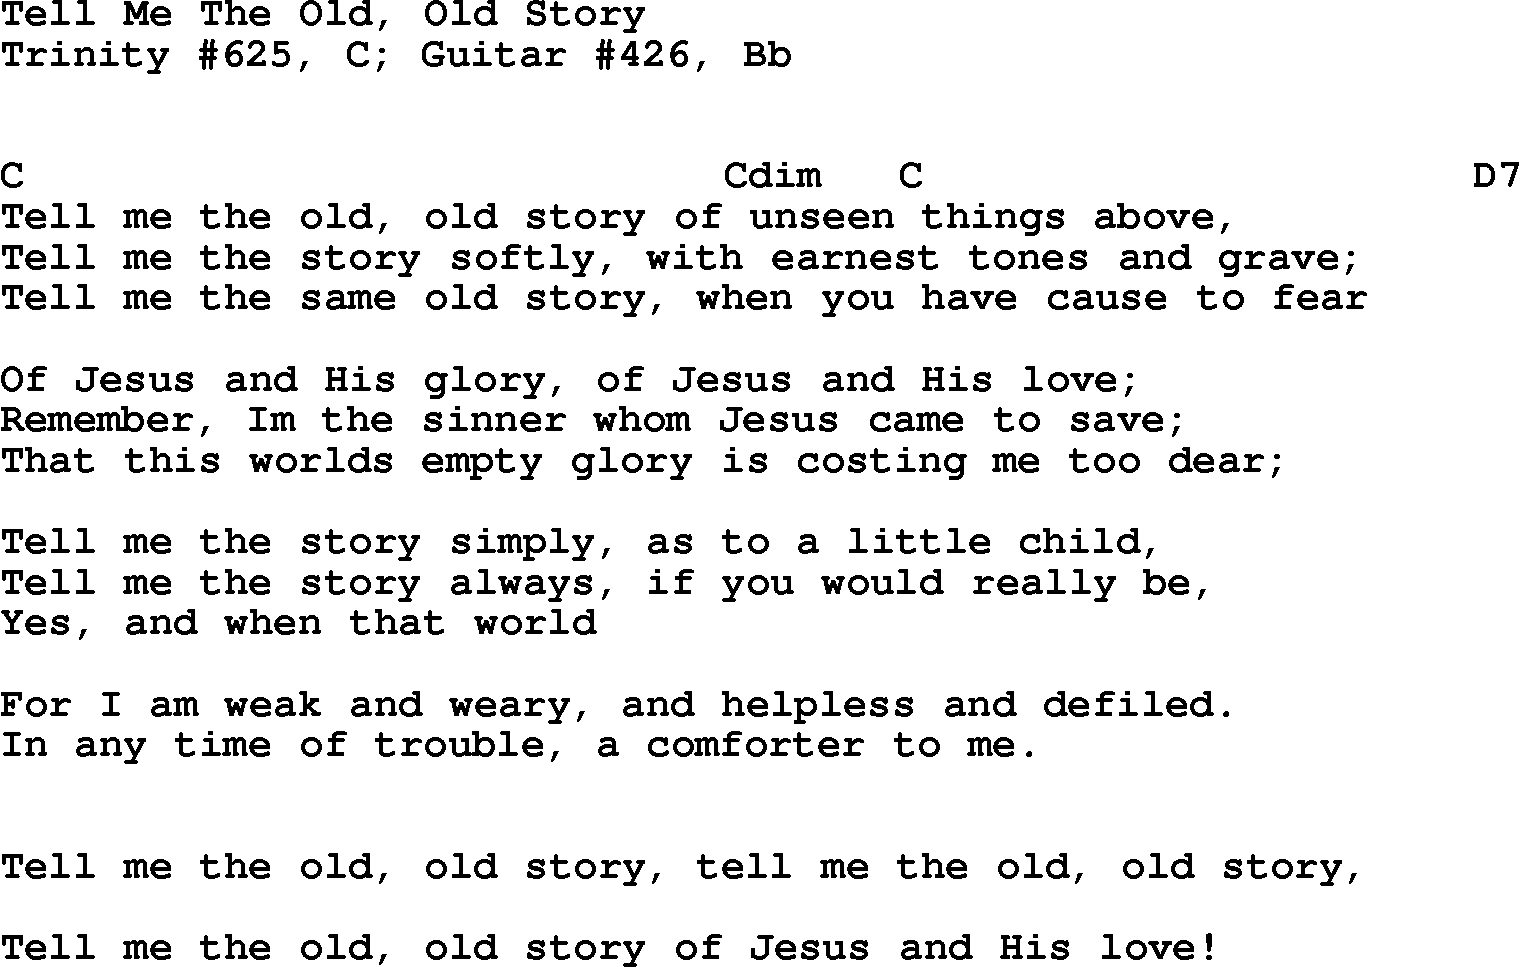 Gospel Song: Tell Me The Old Old Story-Trad, lyrics and chords.